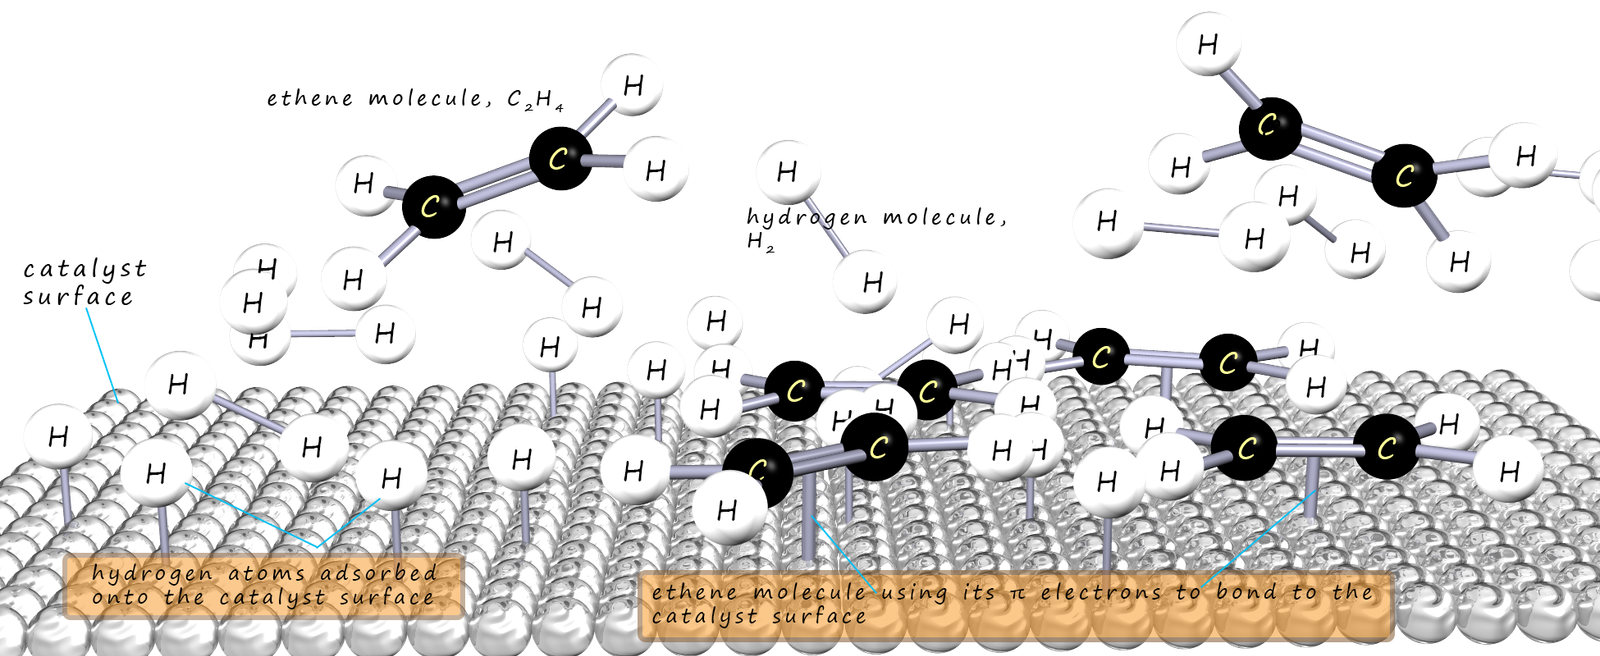 image shows how a unsaturated molecule becomes hydrogenated on the 
surface of a catalyst